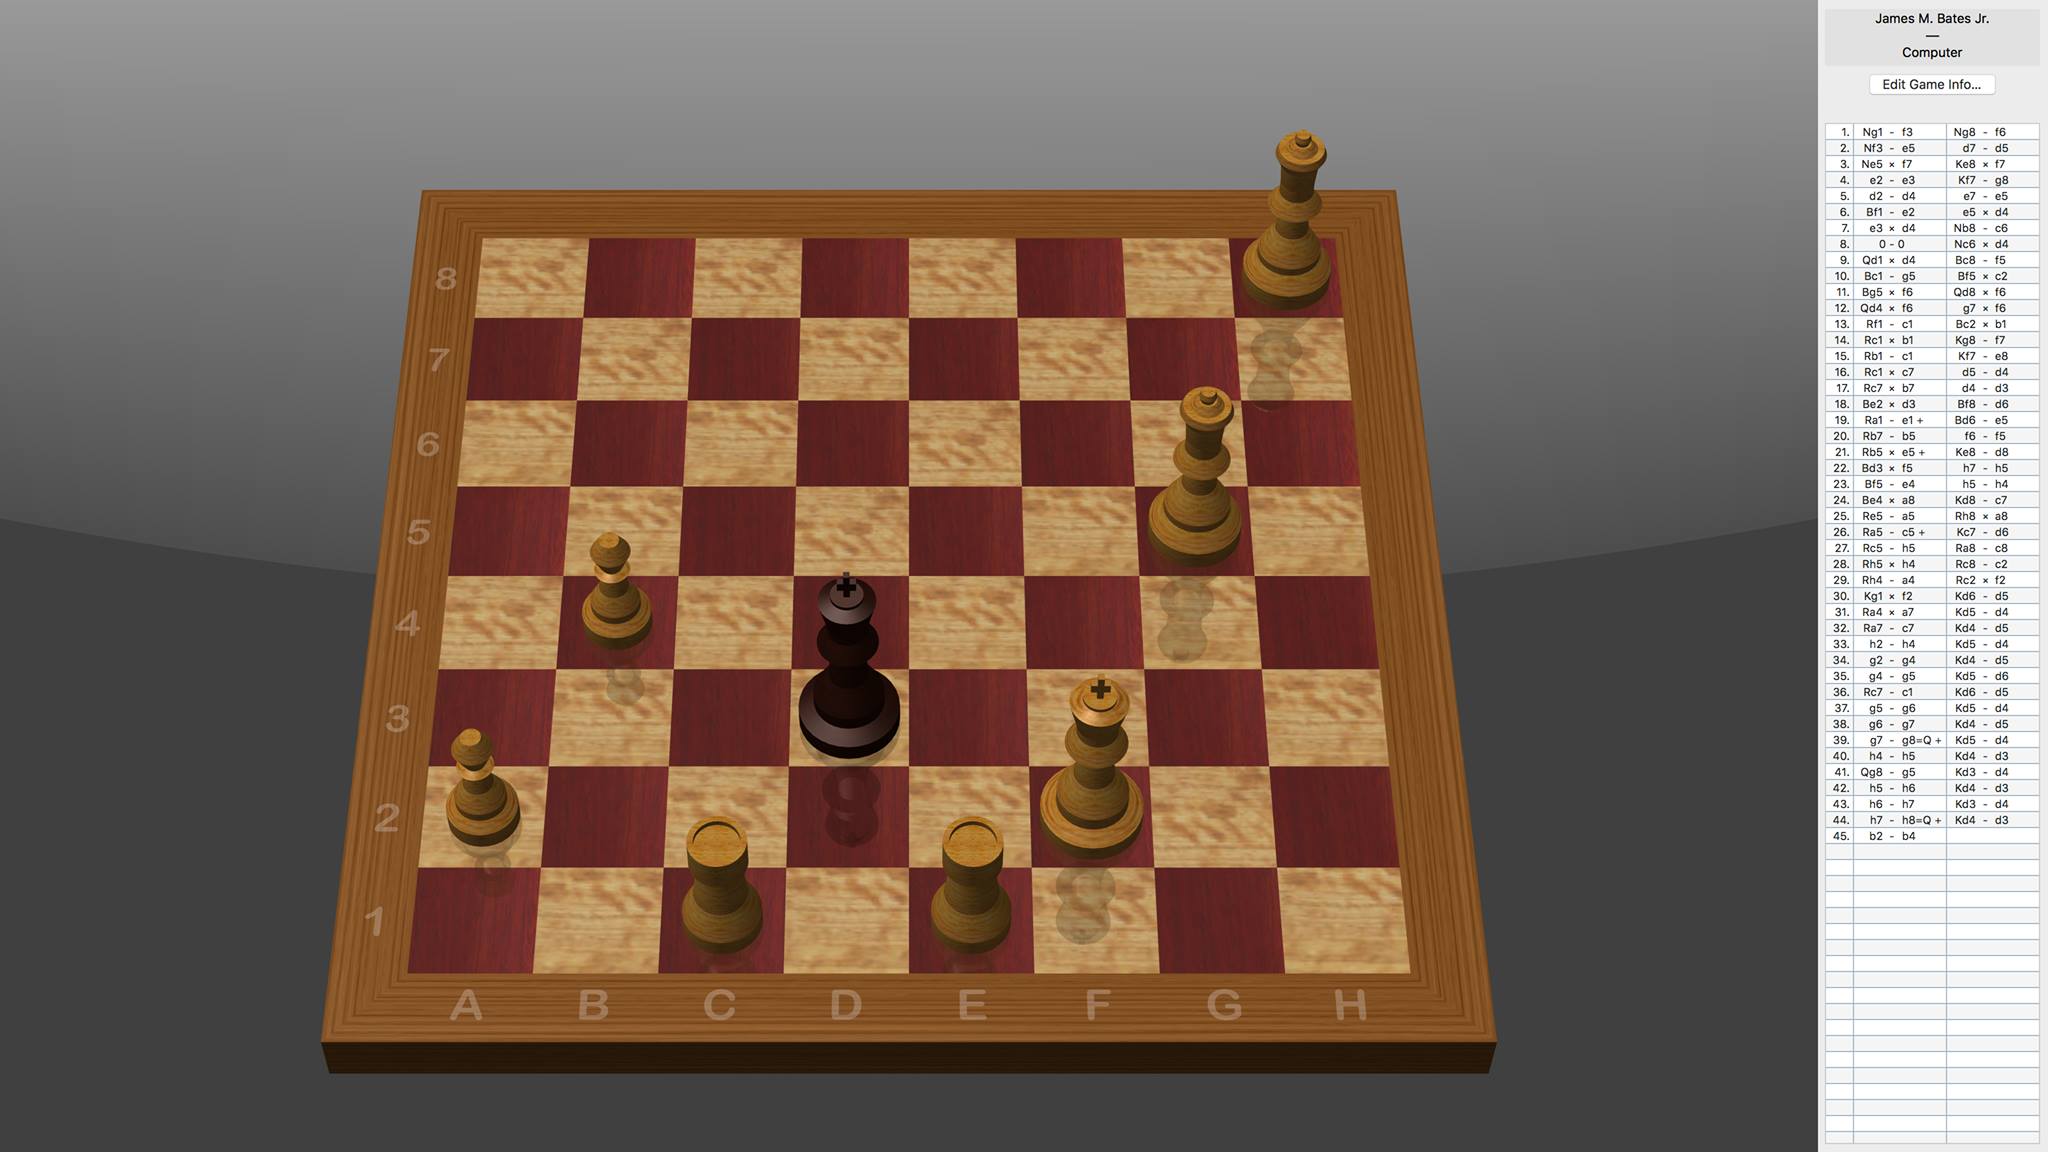 for apple download Mobialia Chess Html5